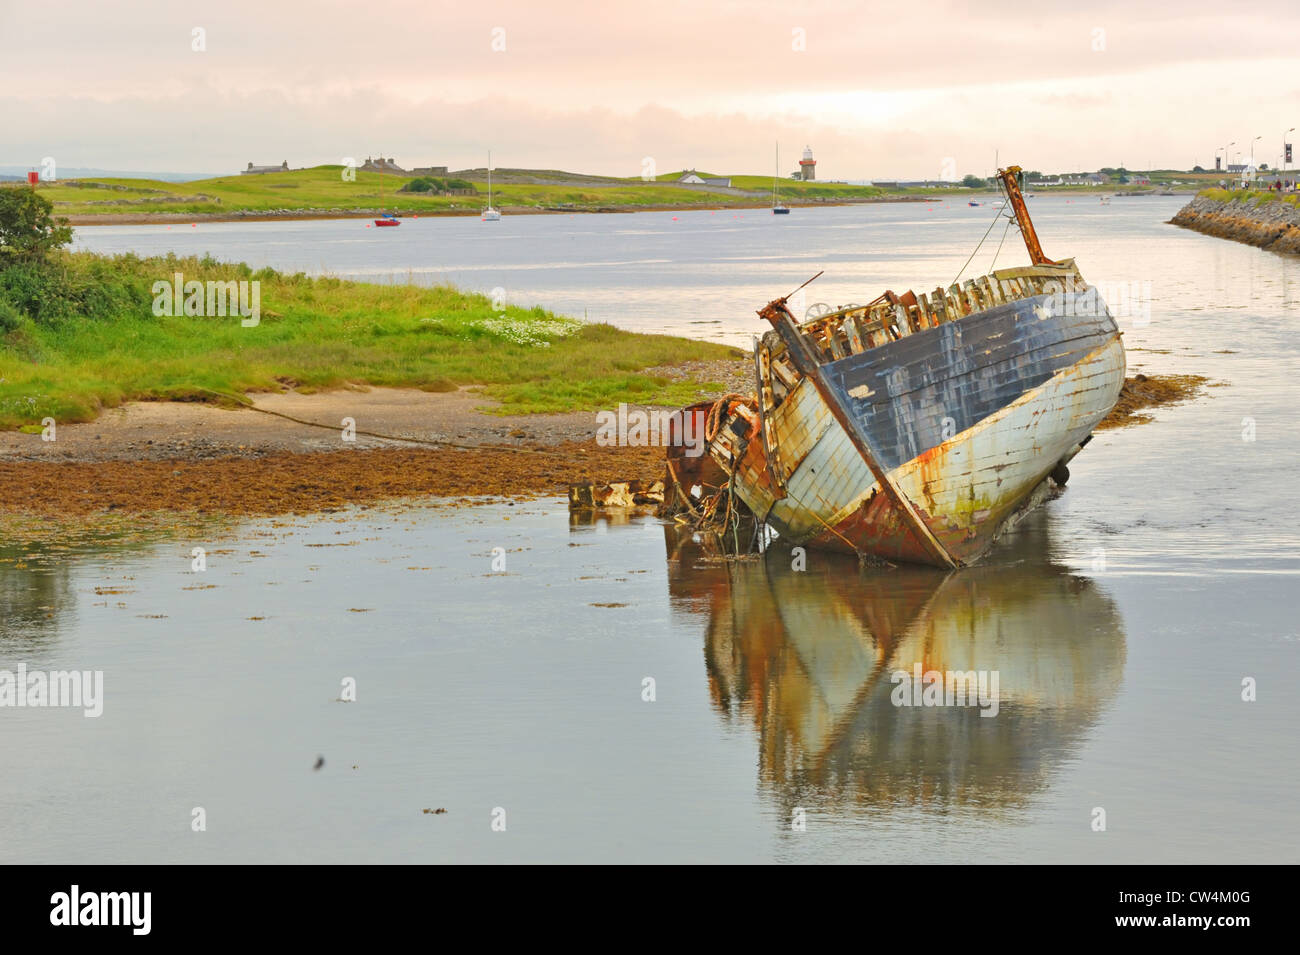 An old fishing boat with a cabin Stock Photo by SkyNextphoto